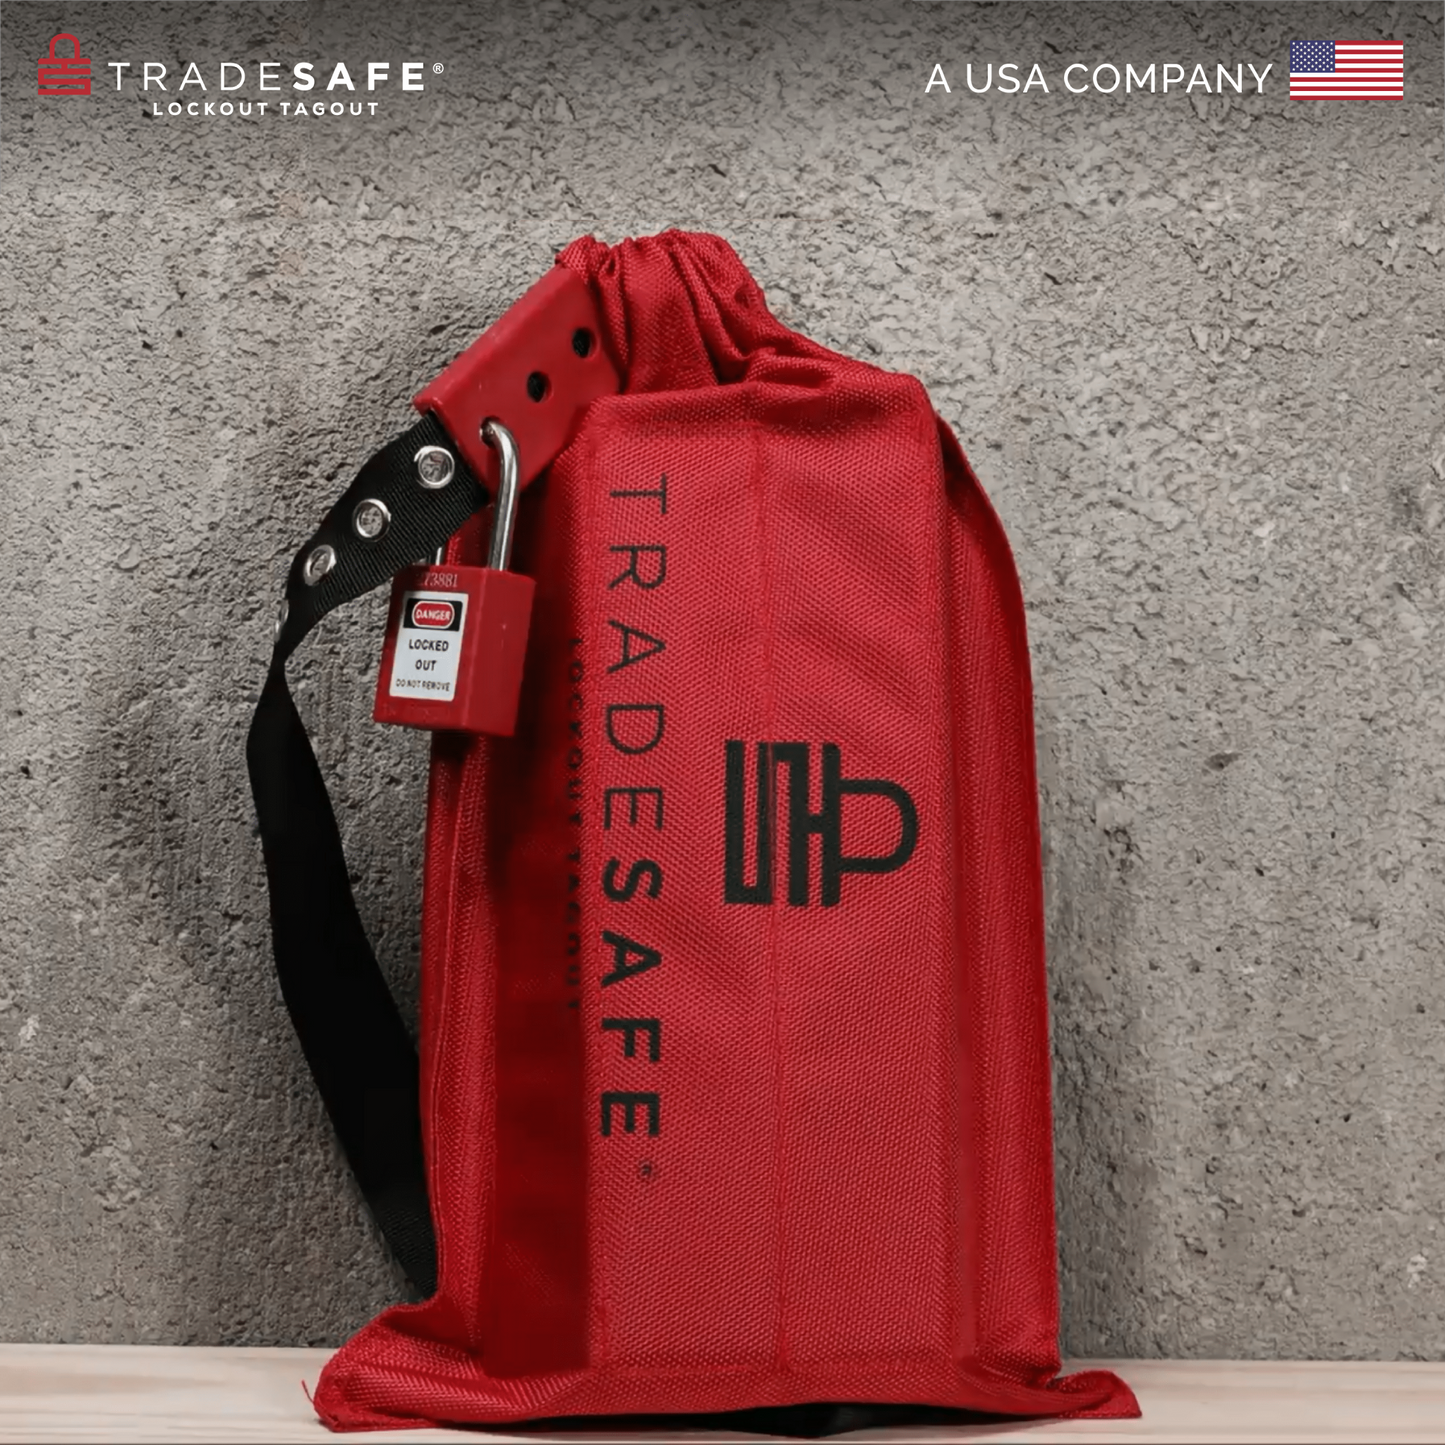 in-use image of lockout tagout cinch bag with padlock in industrial background